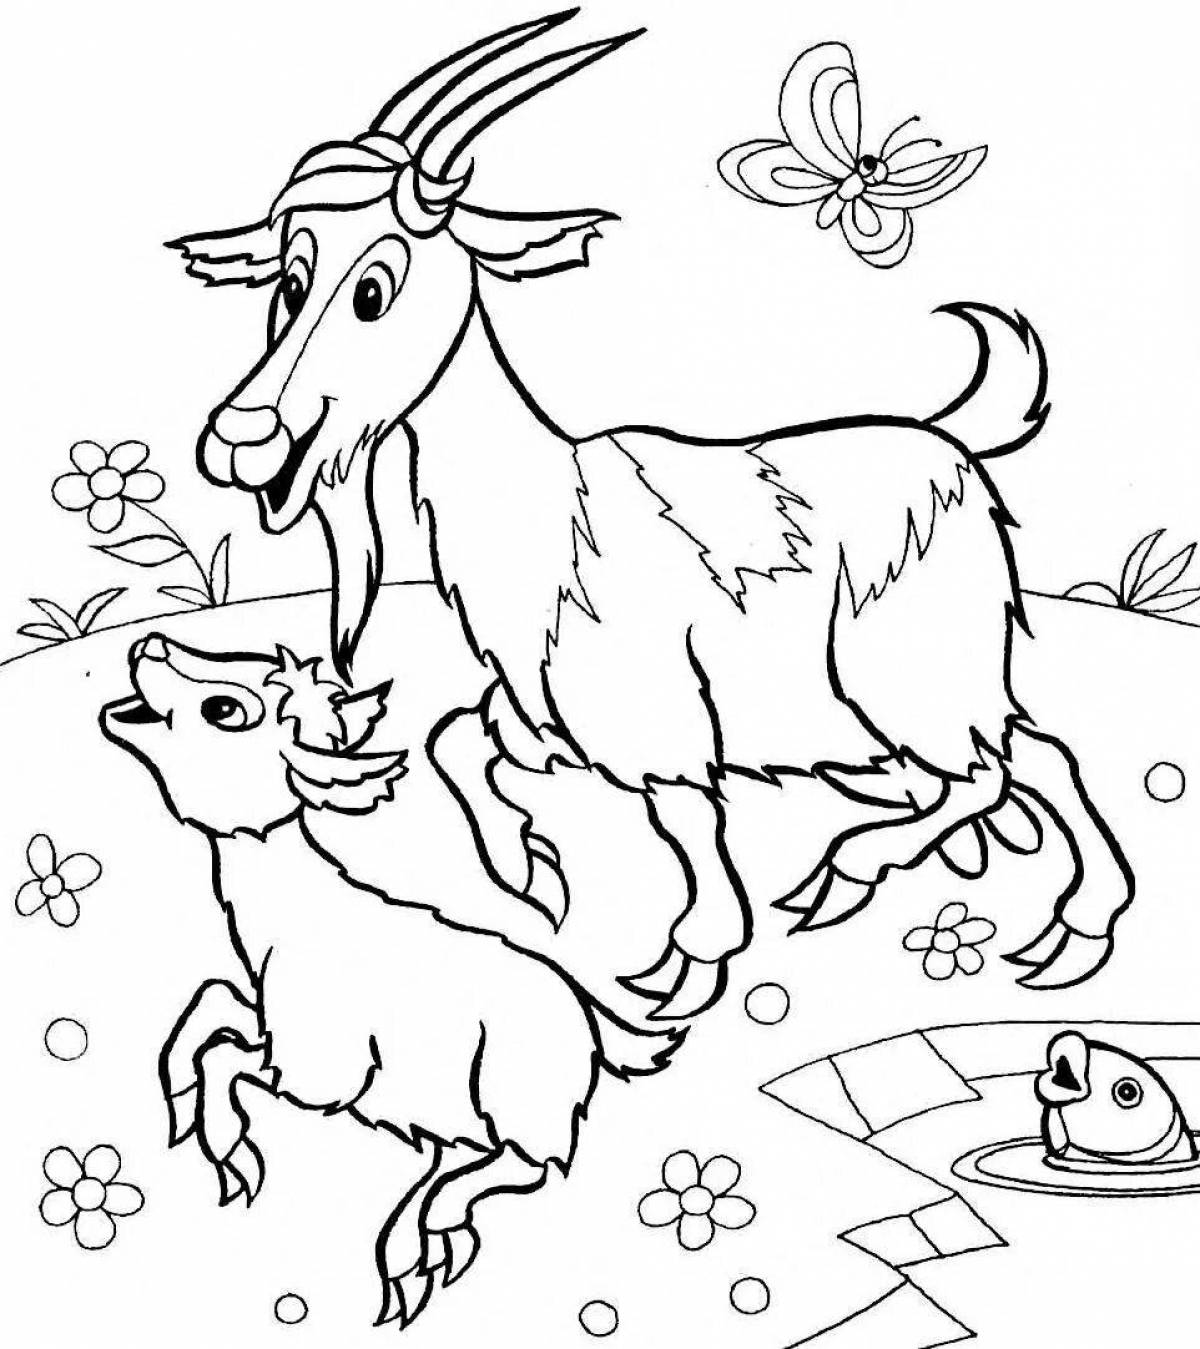 Rampant goat coloring pages for kids